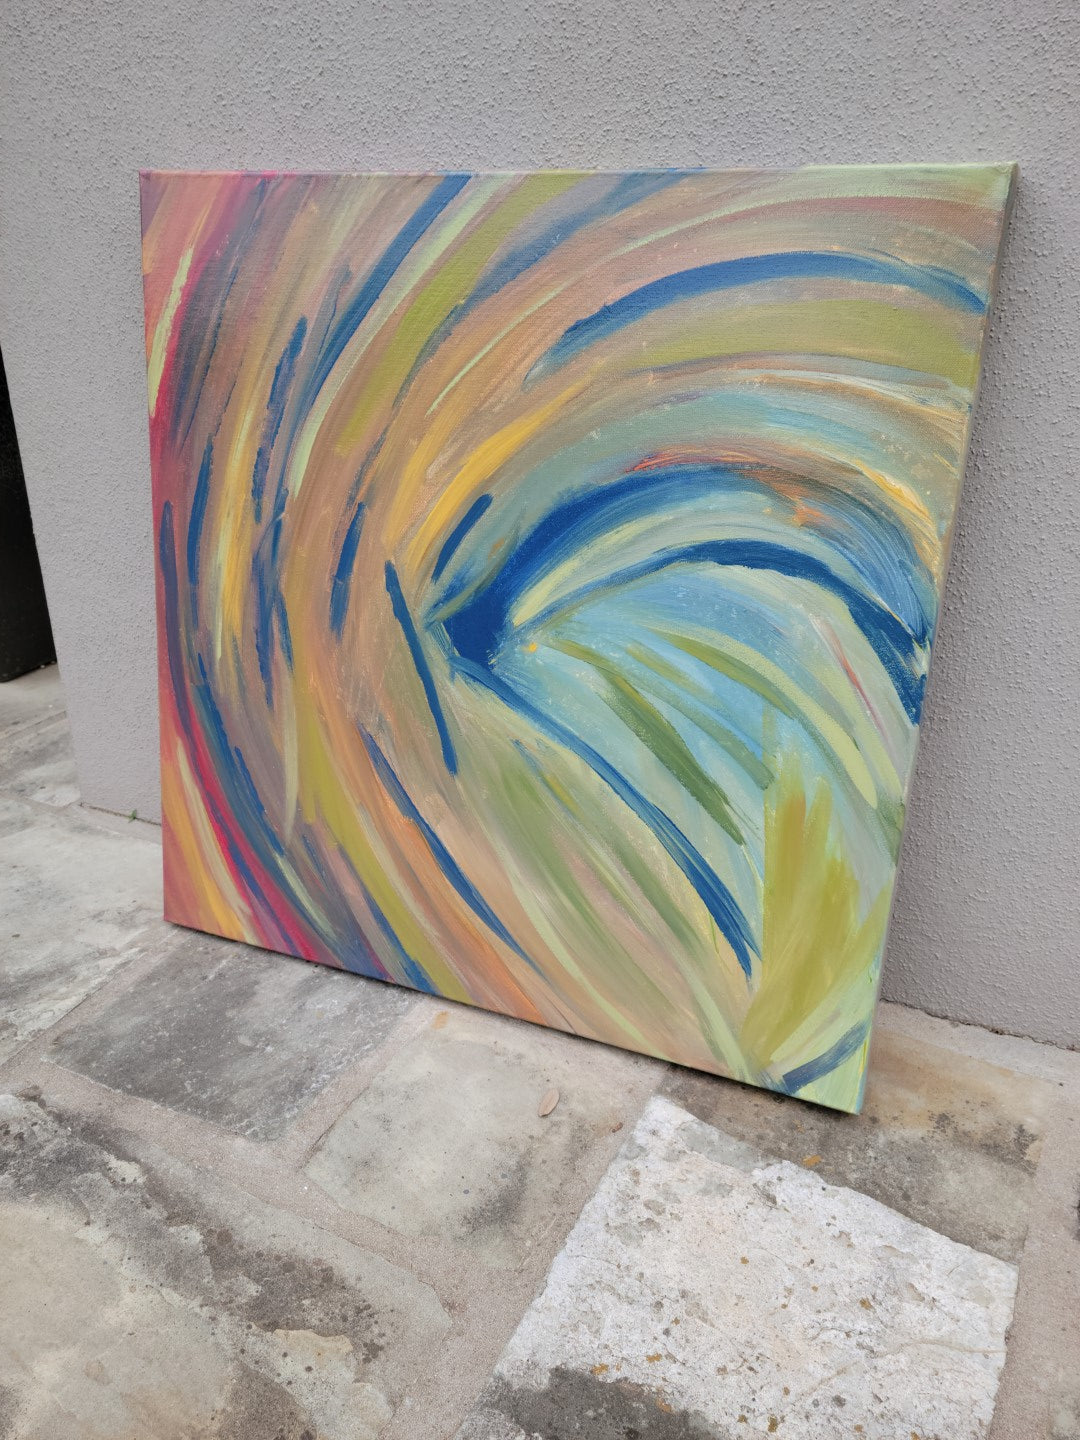 Desolation Tragedy - Original Abstract Painting in Austin Texas 24" x 24"